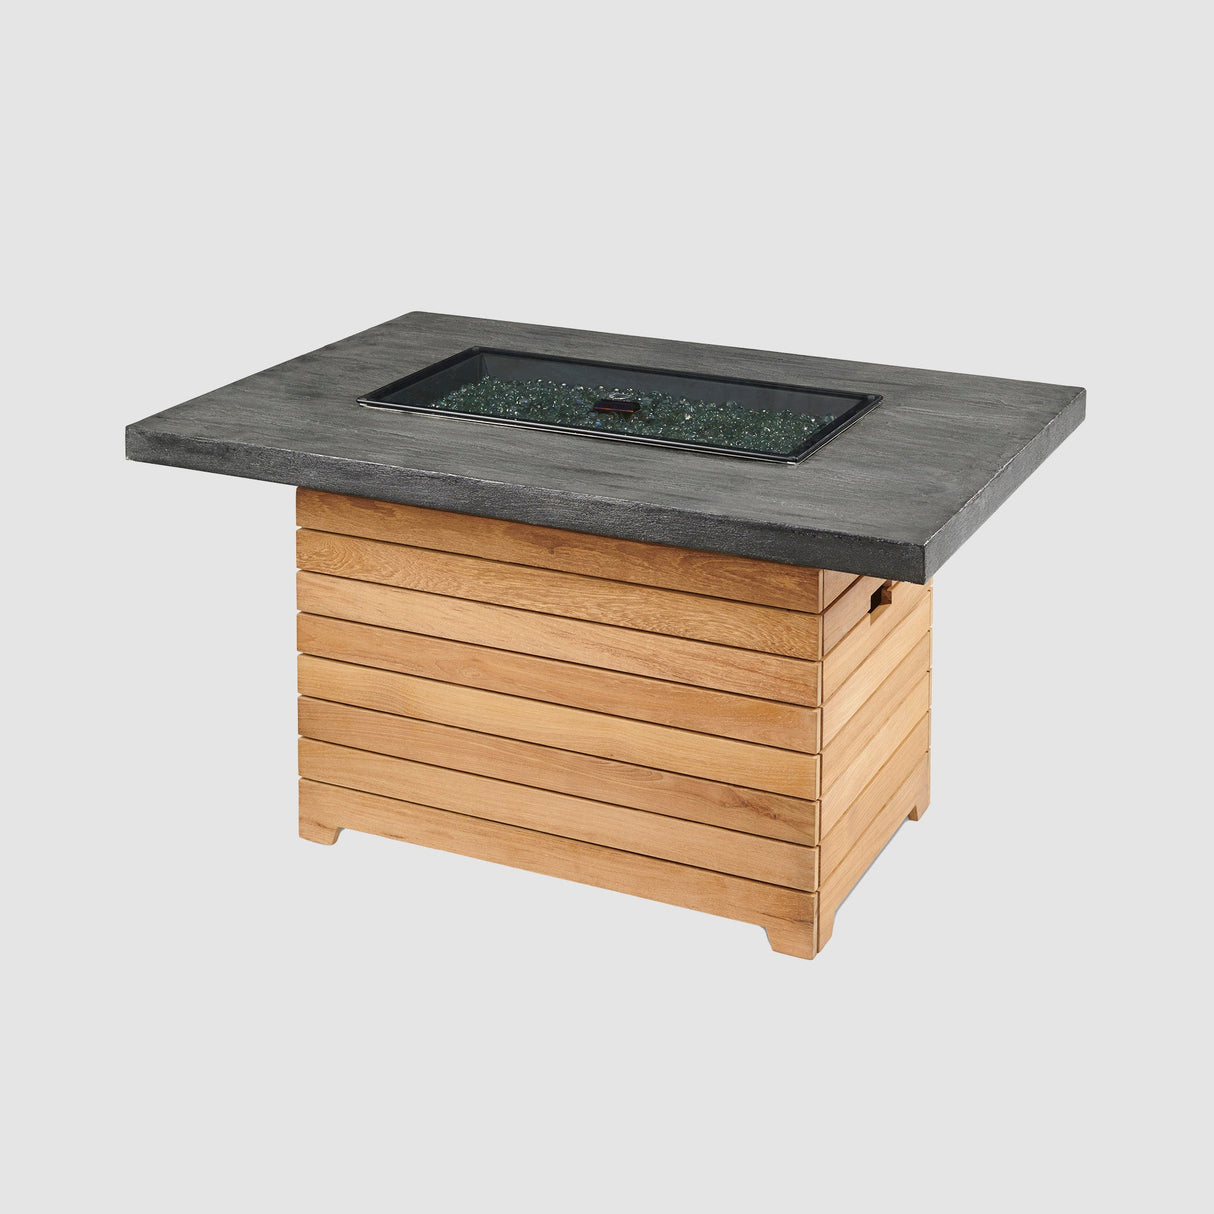 A cover placed on the burner of the Darien Rectangular Gas Fire Pit Table with an Everblend top